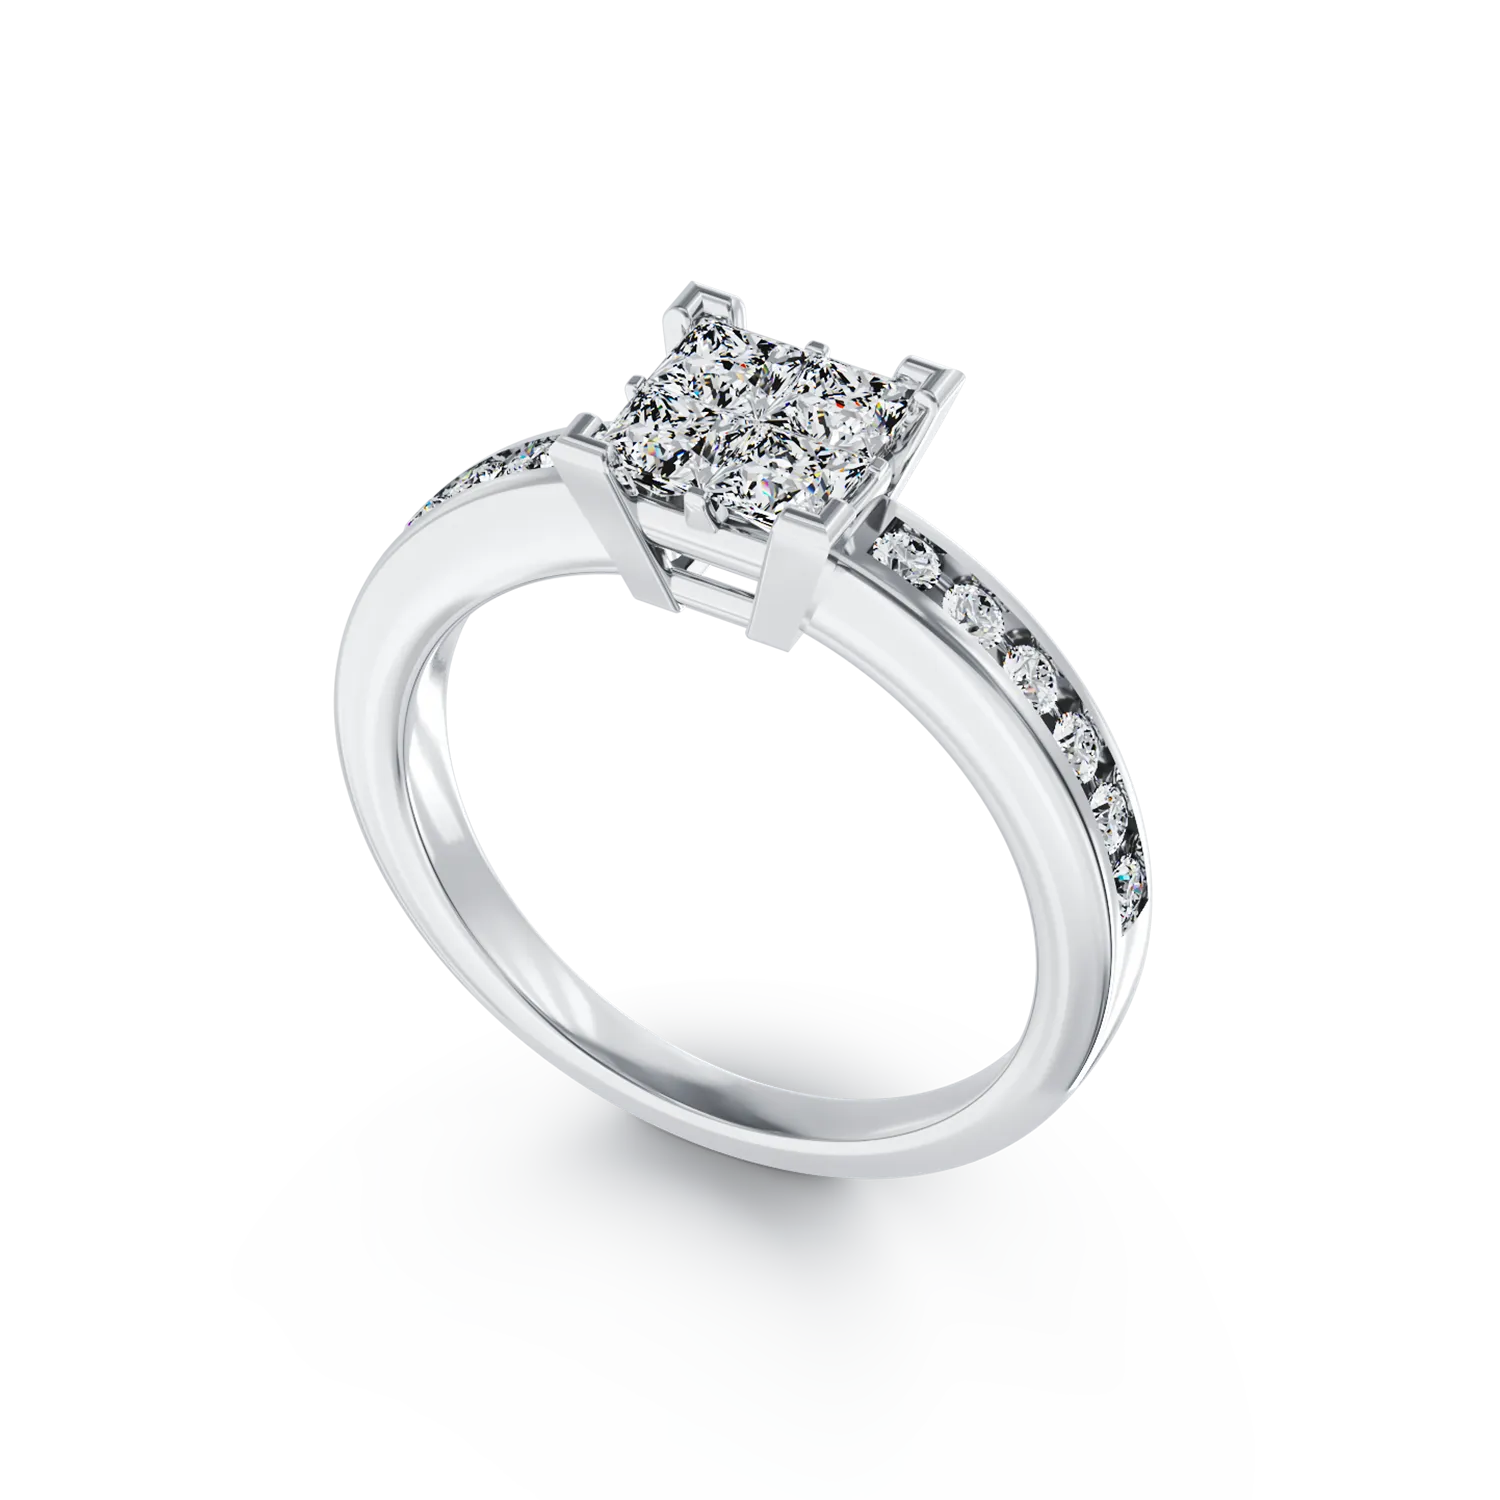 18K white gold engagement ring with 0.74ct diamonds